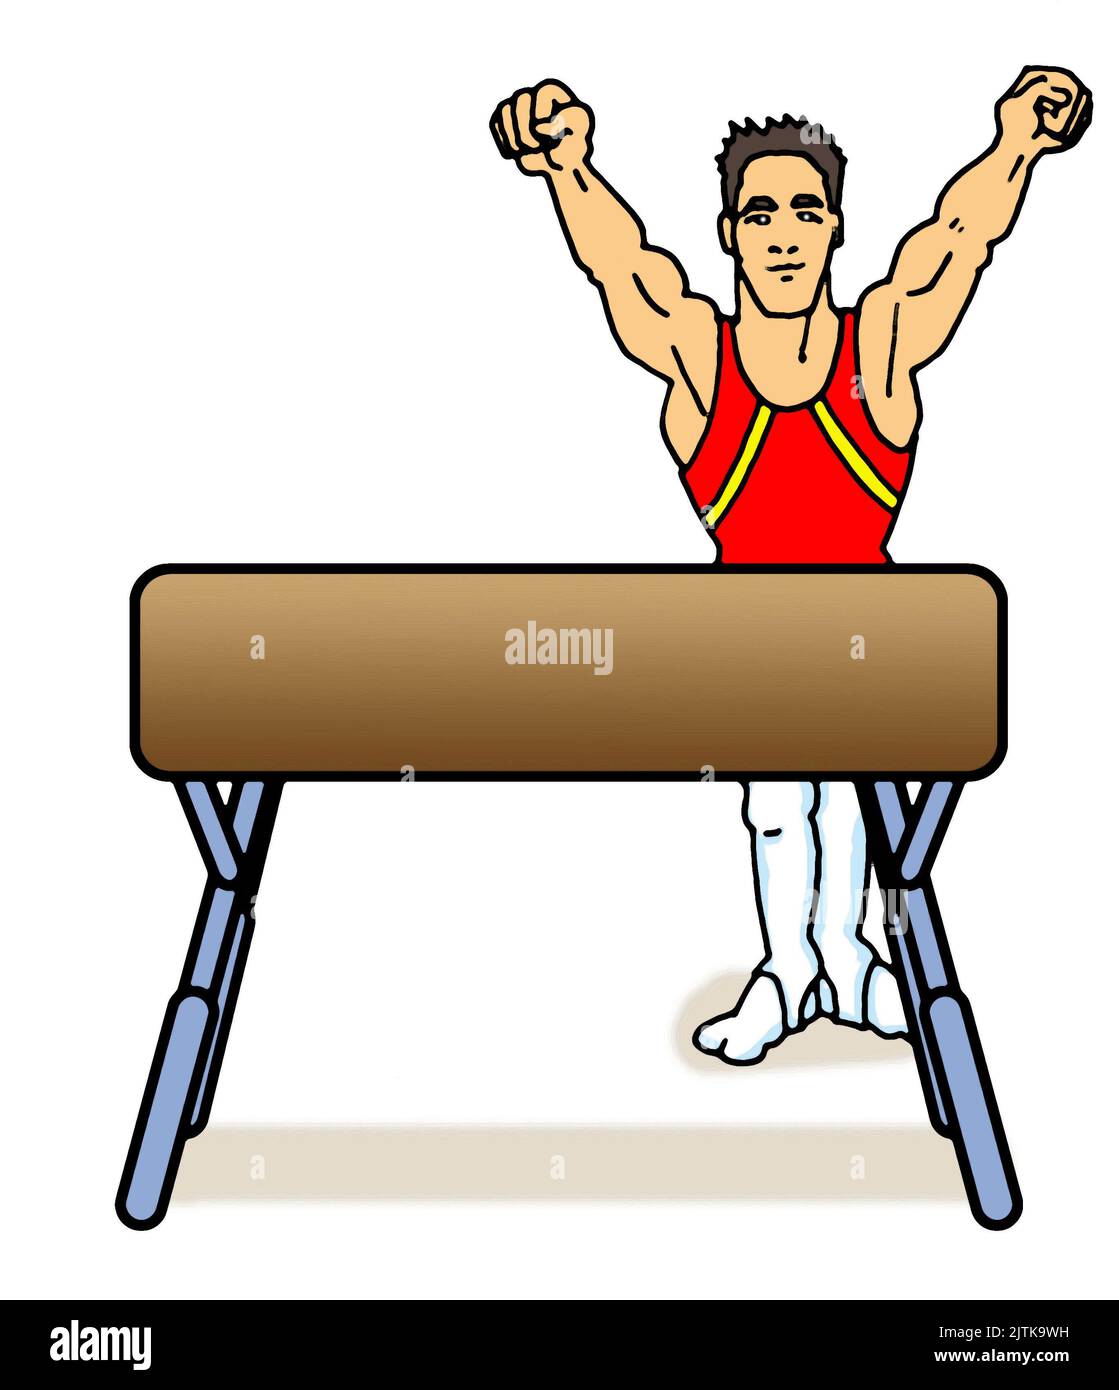 Series of art / illustrations showing male athlete carrying out one of the Olympic men's gymnastics events. Here he prepares to mount the pommel horse Stock Photo